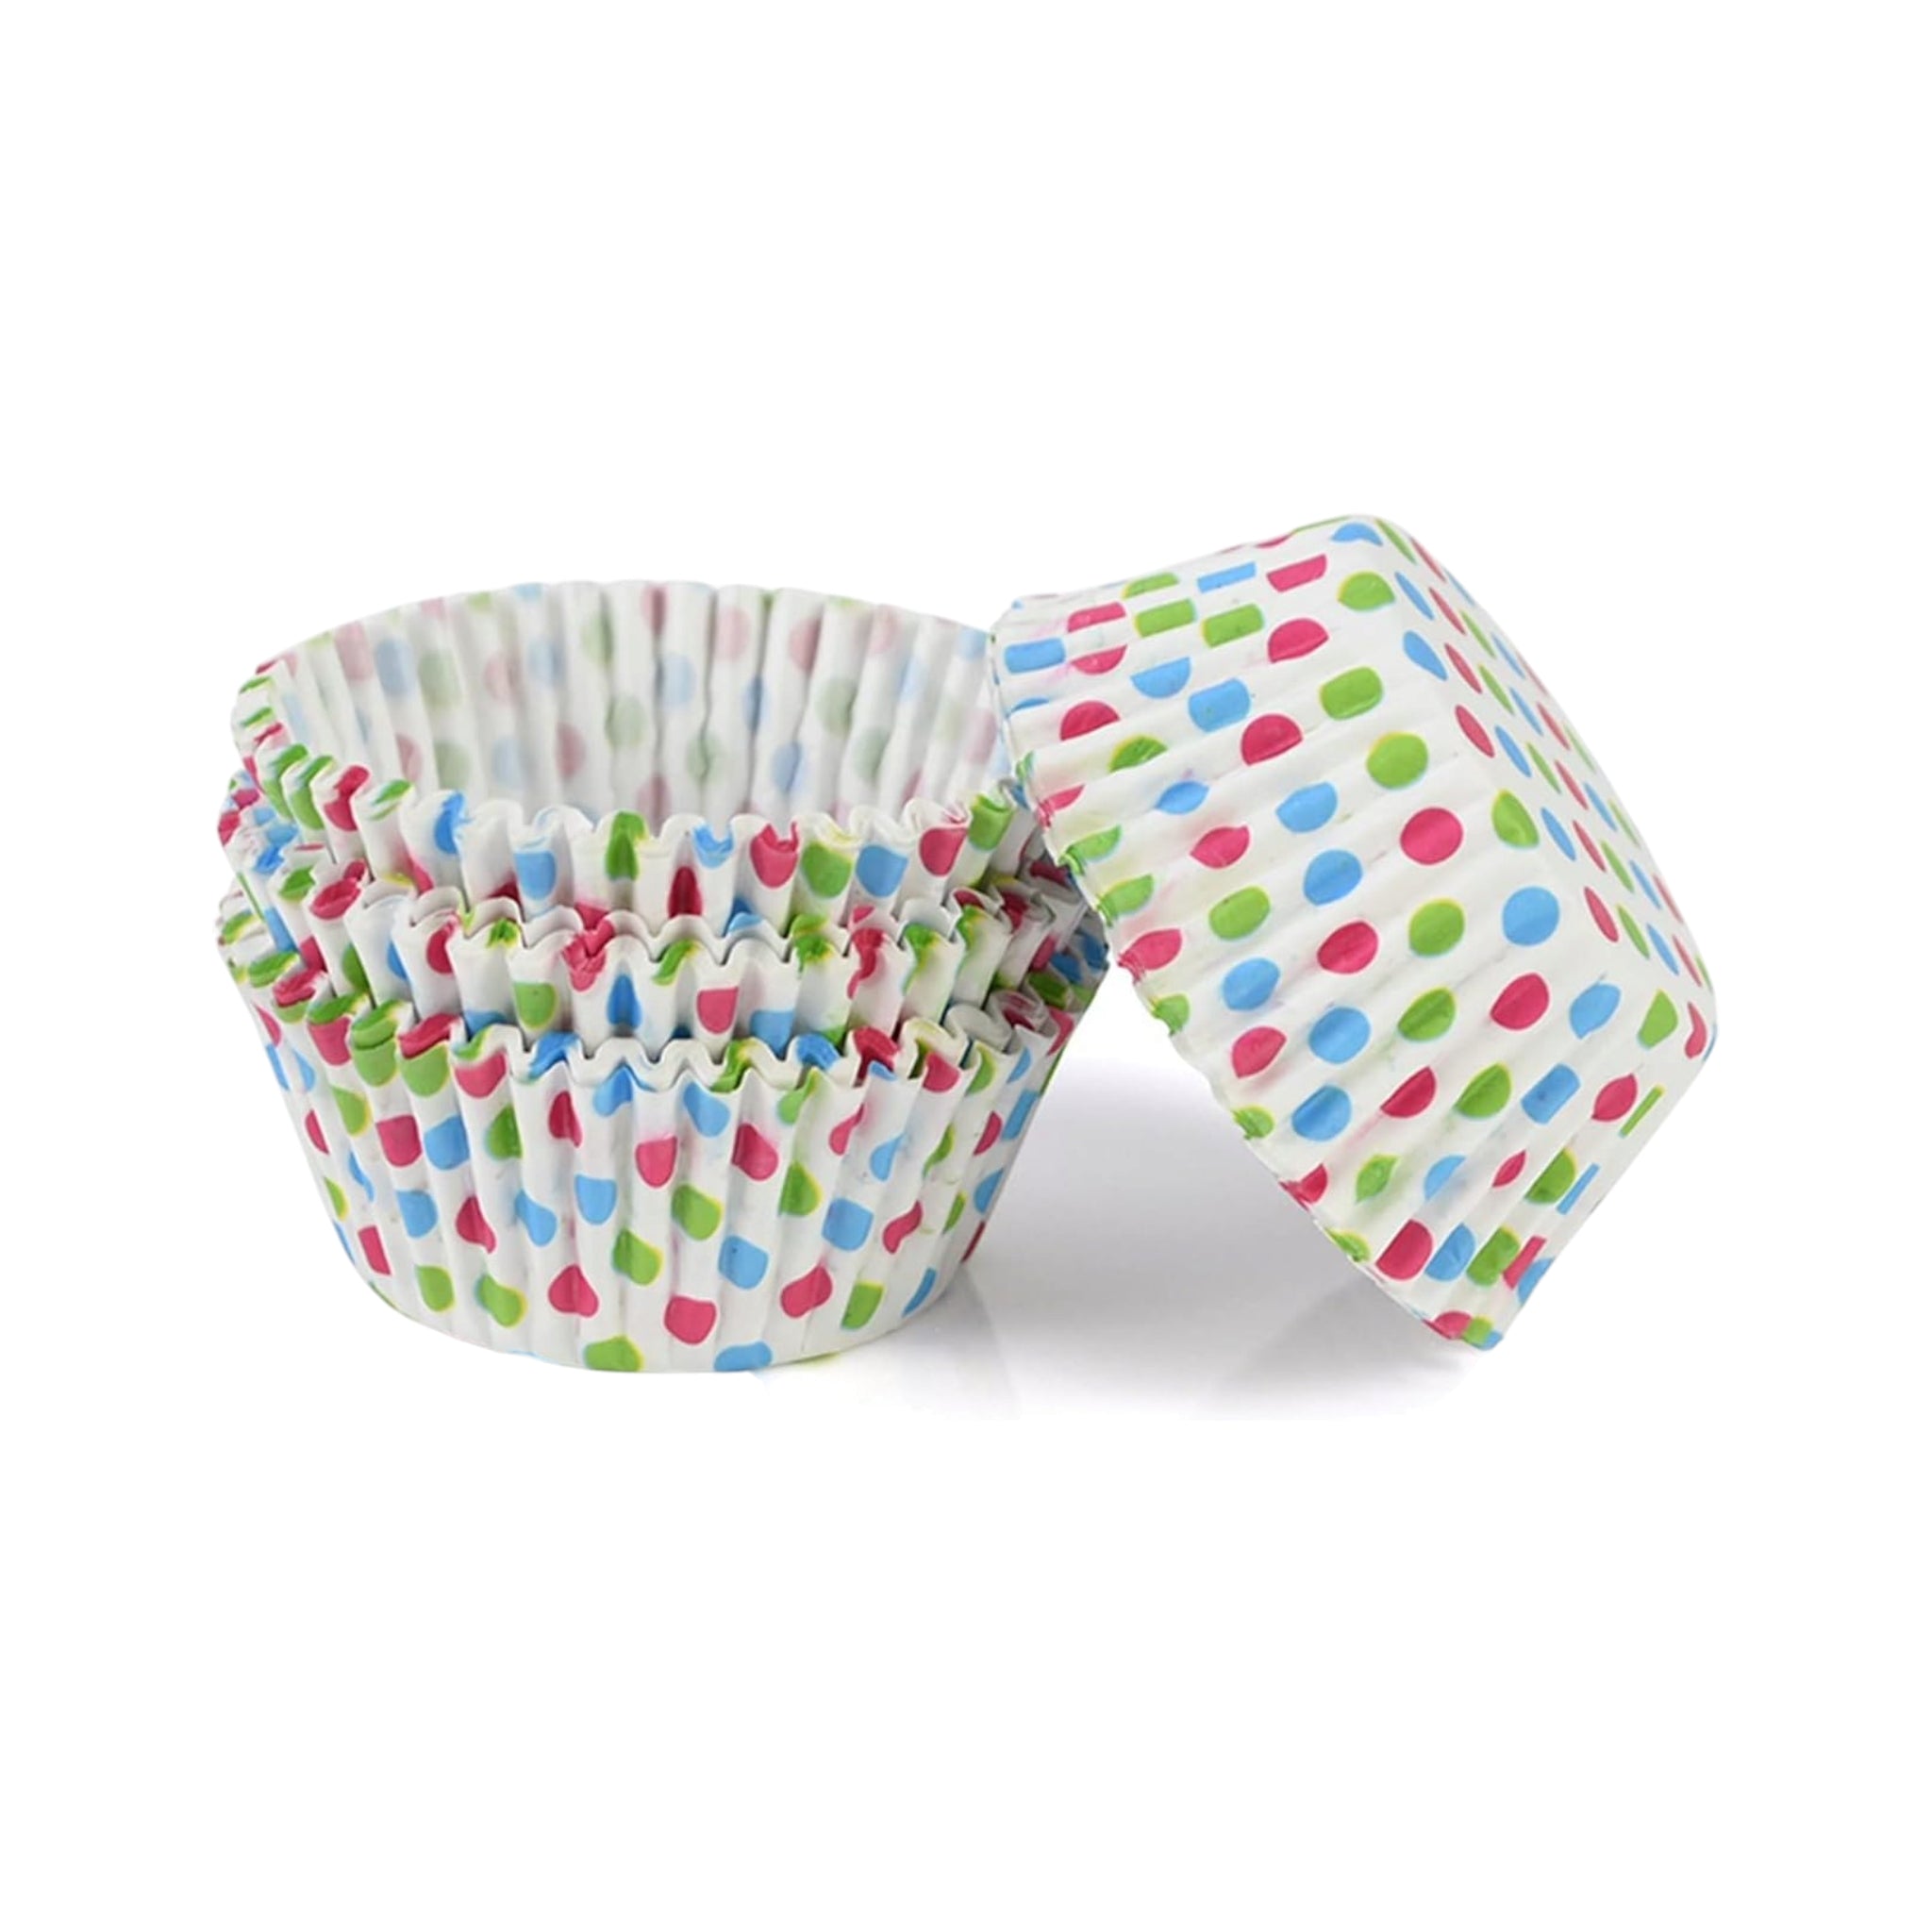 Baking Cupcake Paper Liners White 12cm with PVC Holder 12cm White with Color Polka Dots